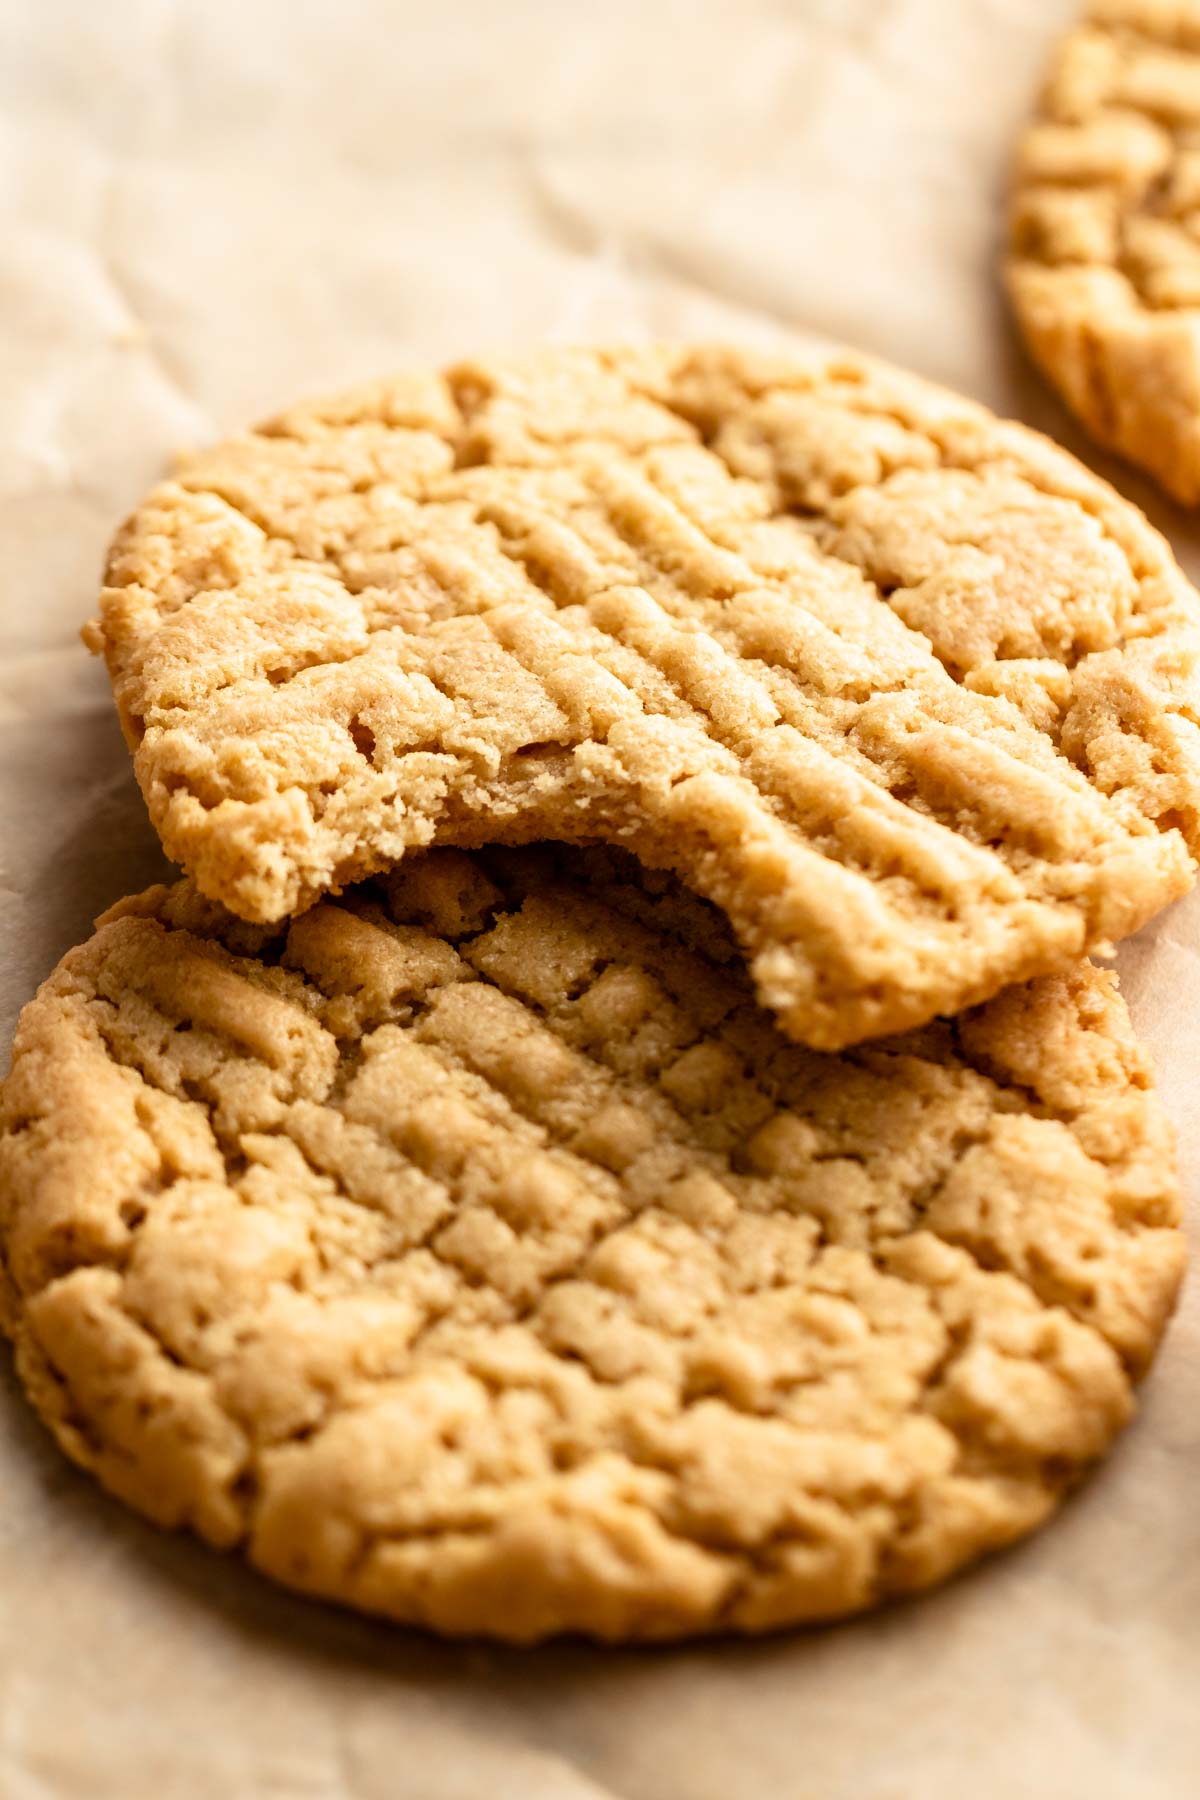 4 ingredient peanut butter cookies with the top one missing a bite.